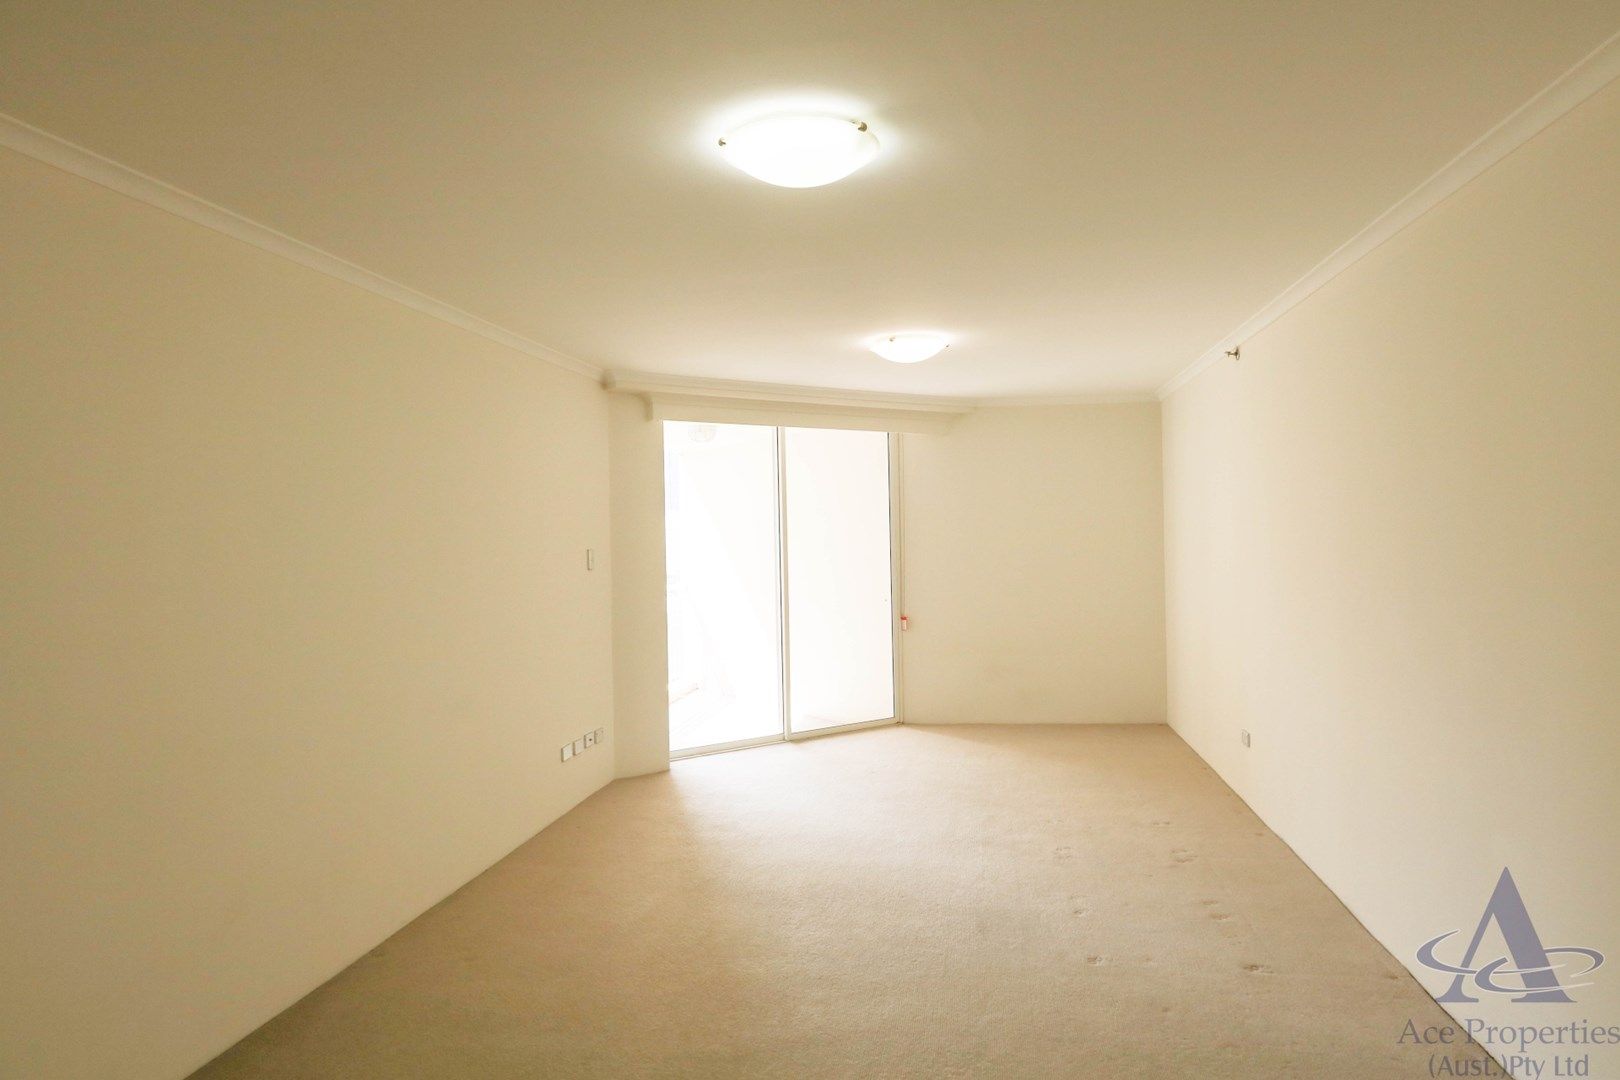 1 bedrooms Apartment / Unit / Flat in 569 George Street SYDNEY NSW, 2000